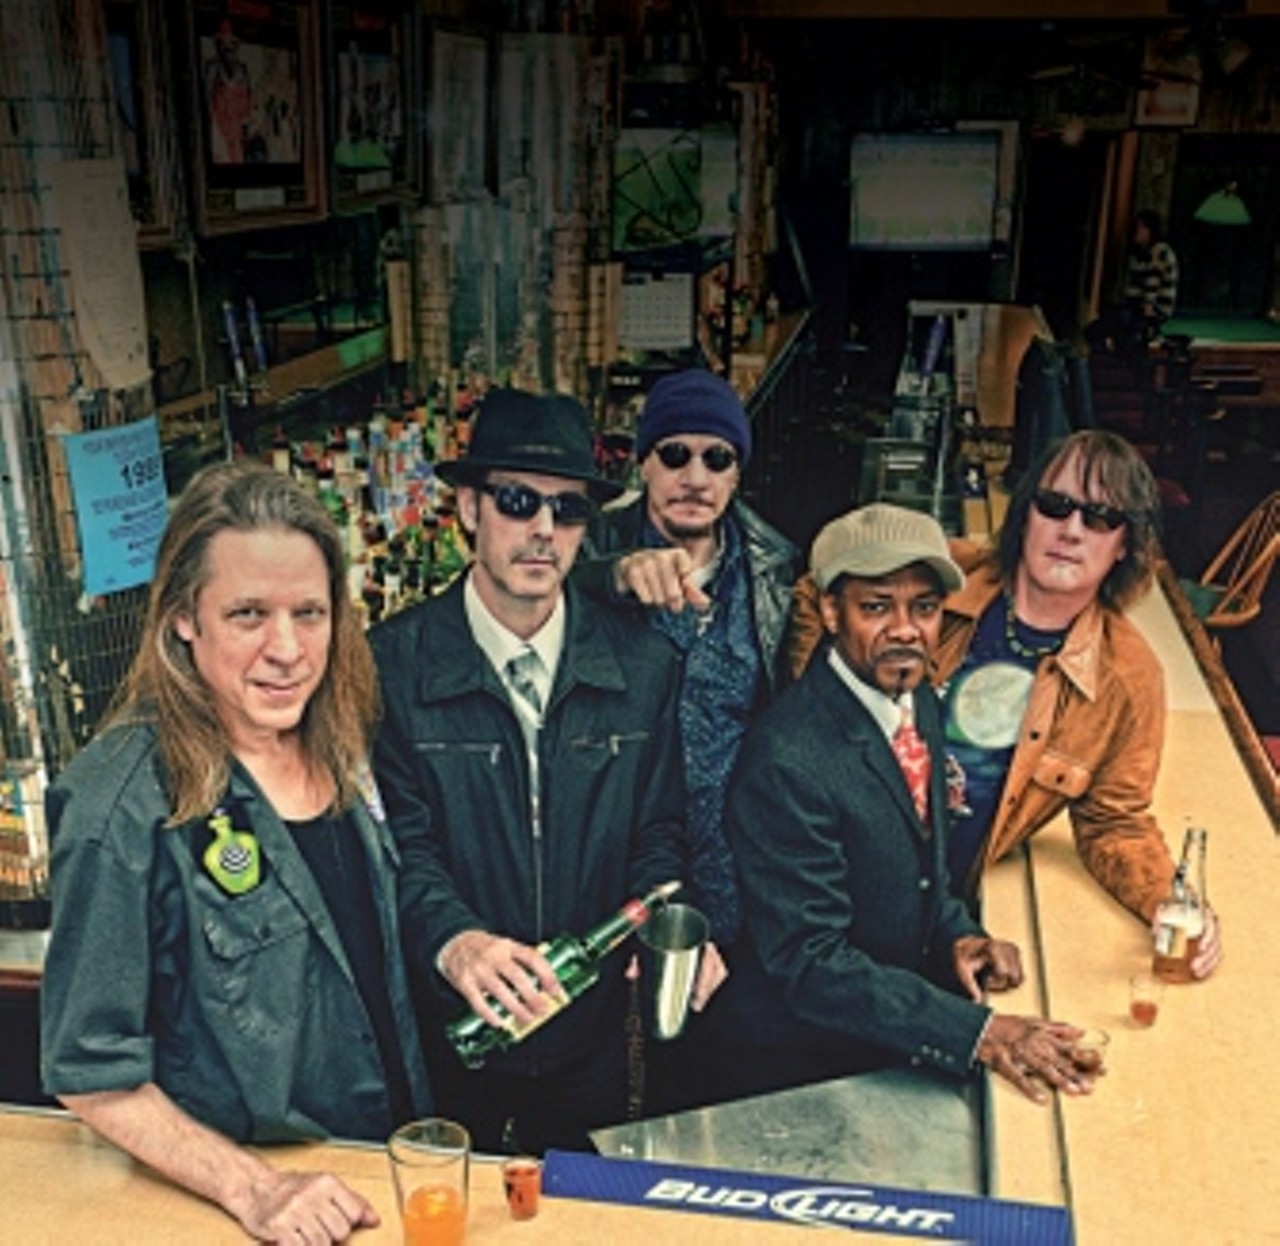 (8/31; Budweiser Rock Stage, Arts Beats & Eats)
Howling Diablos (9:45 p.m.)
With Tino Gross’ Howling Diablos, you know exactly what you’re going to get — smooth blues and Gross’ likeable, gruff vocals. It’ll get funky, so wear your dance pants. Click here for more info